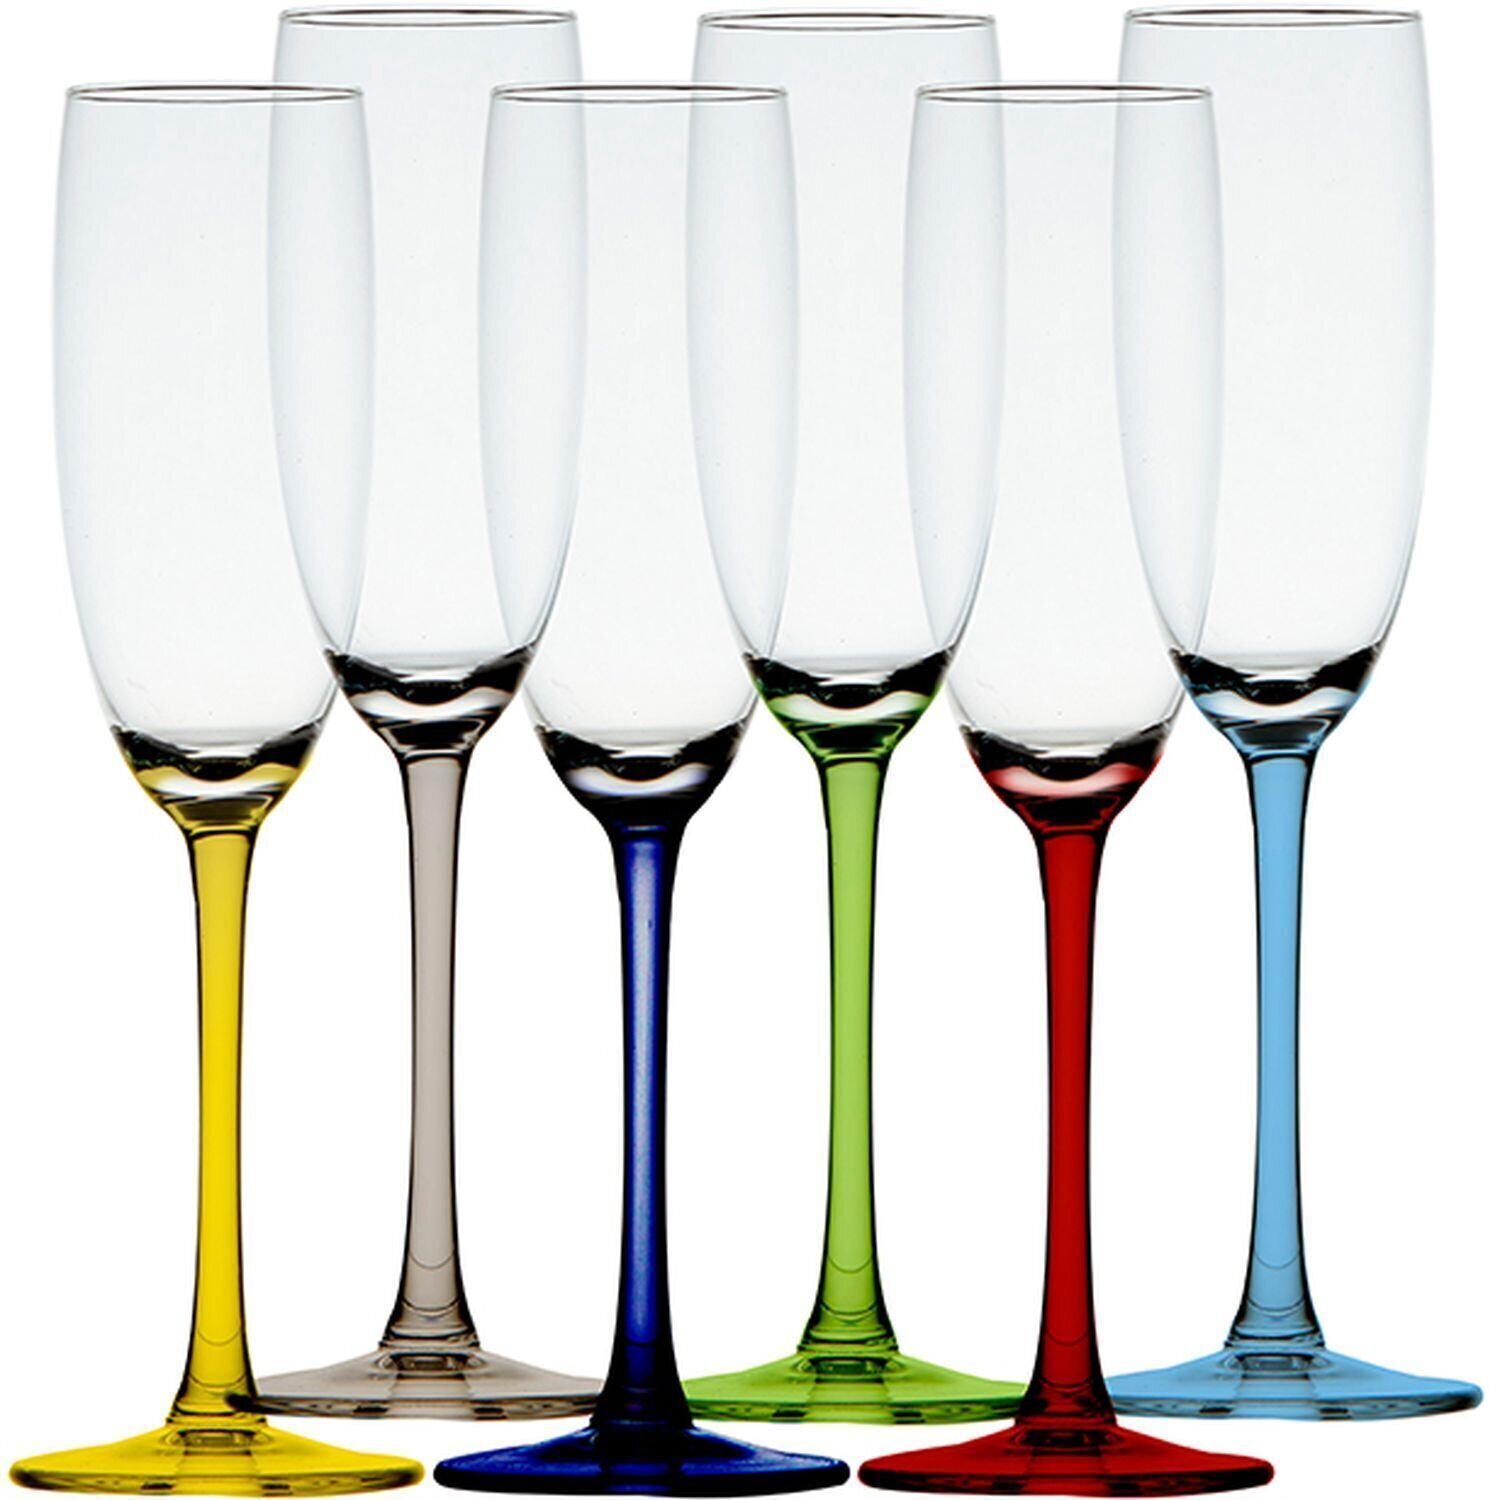 Keukengerei voor de boot Marine Business Party Champagne Glass 6 Champagne Glass